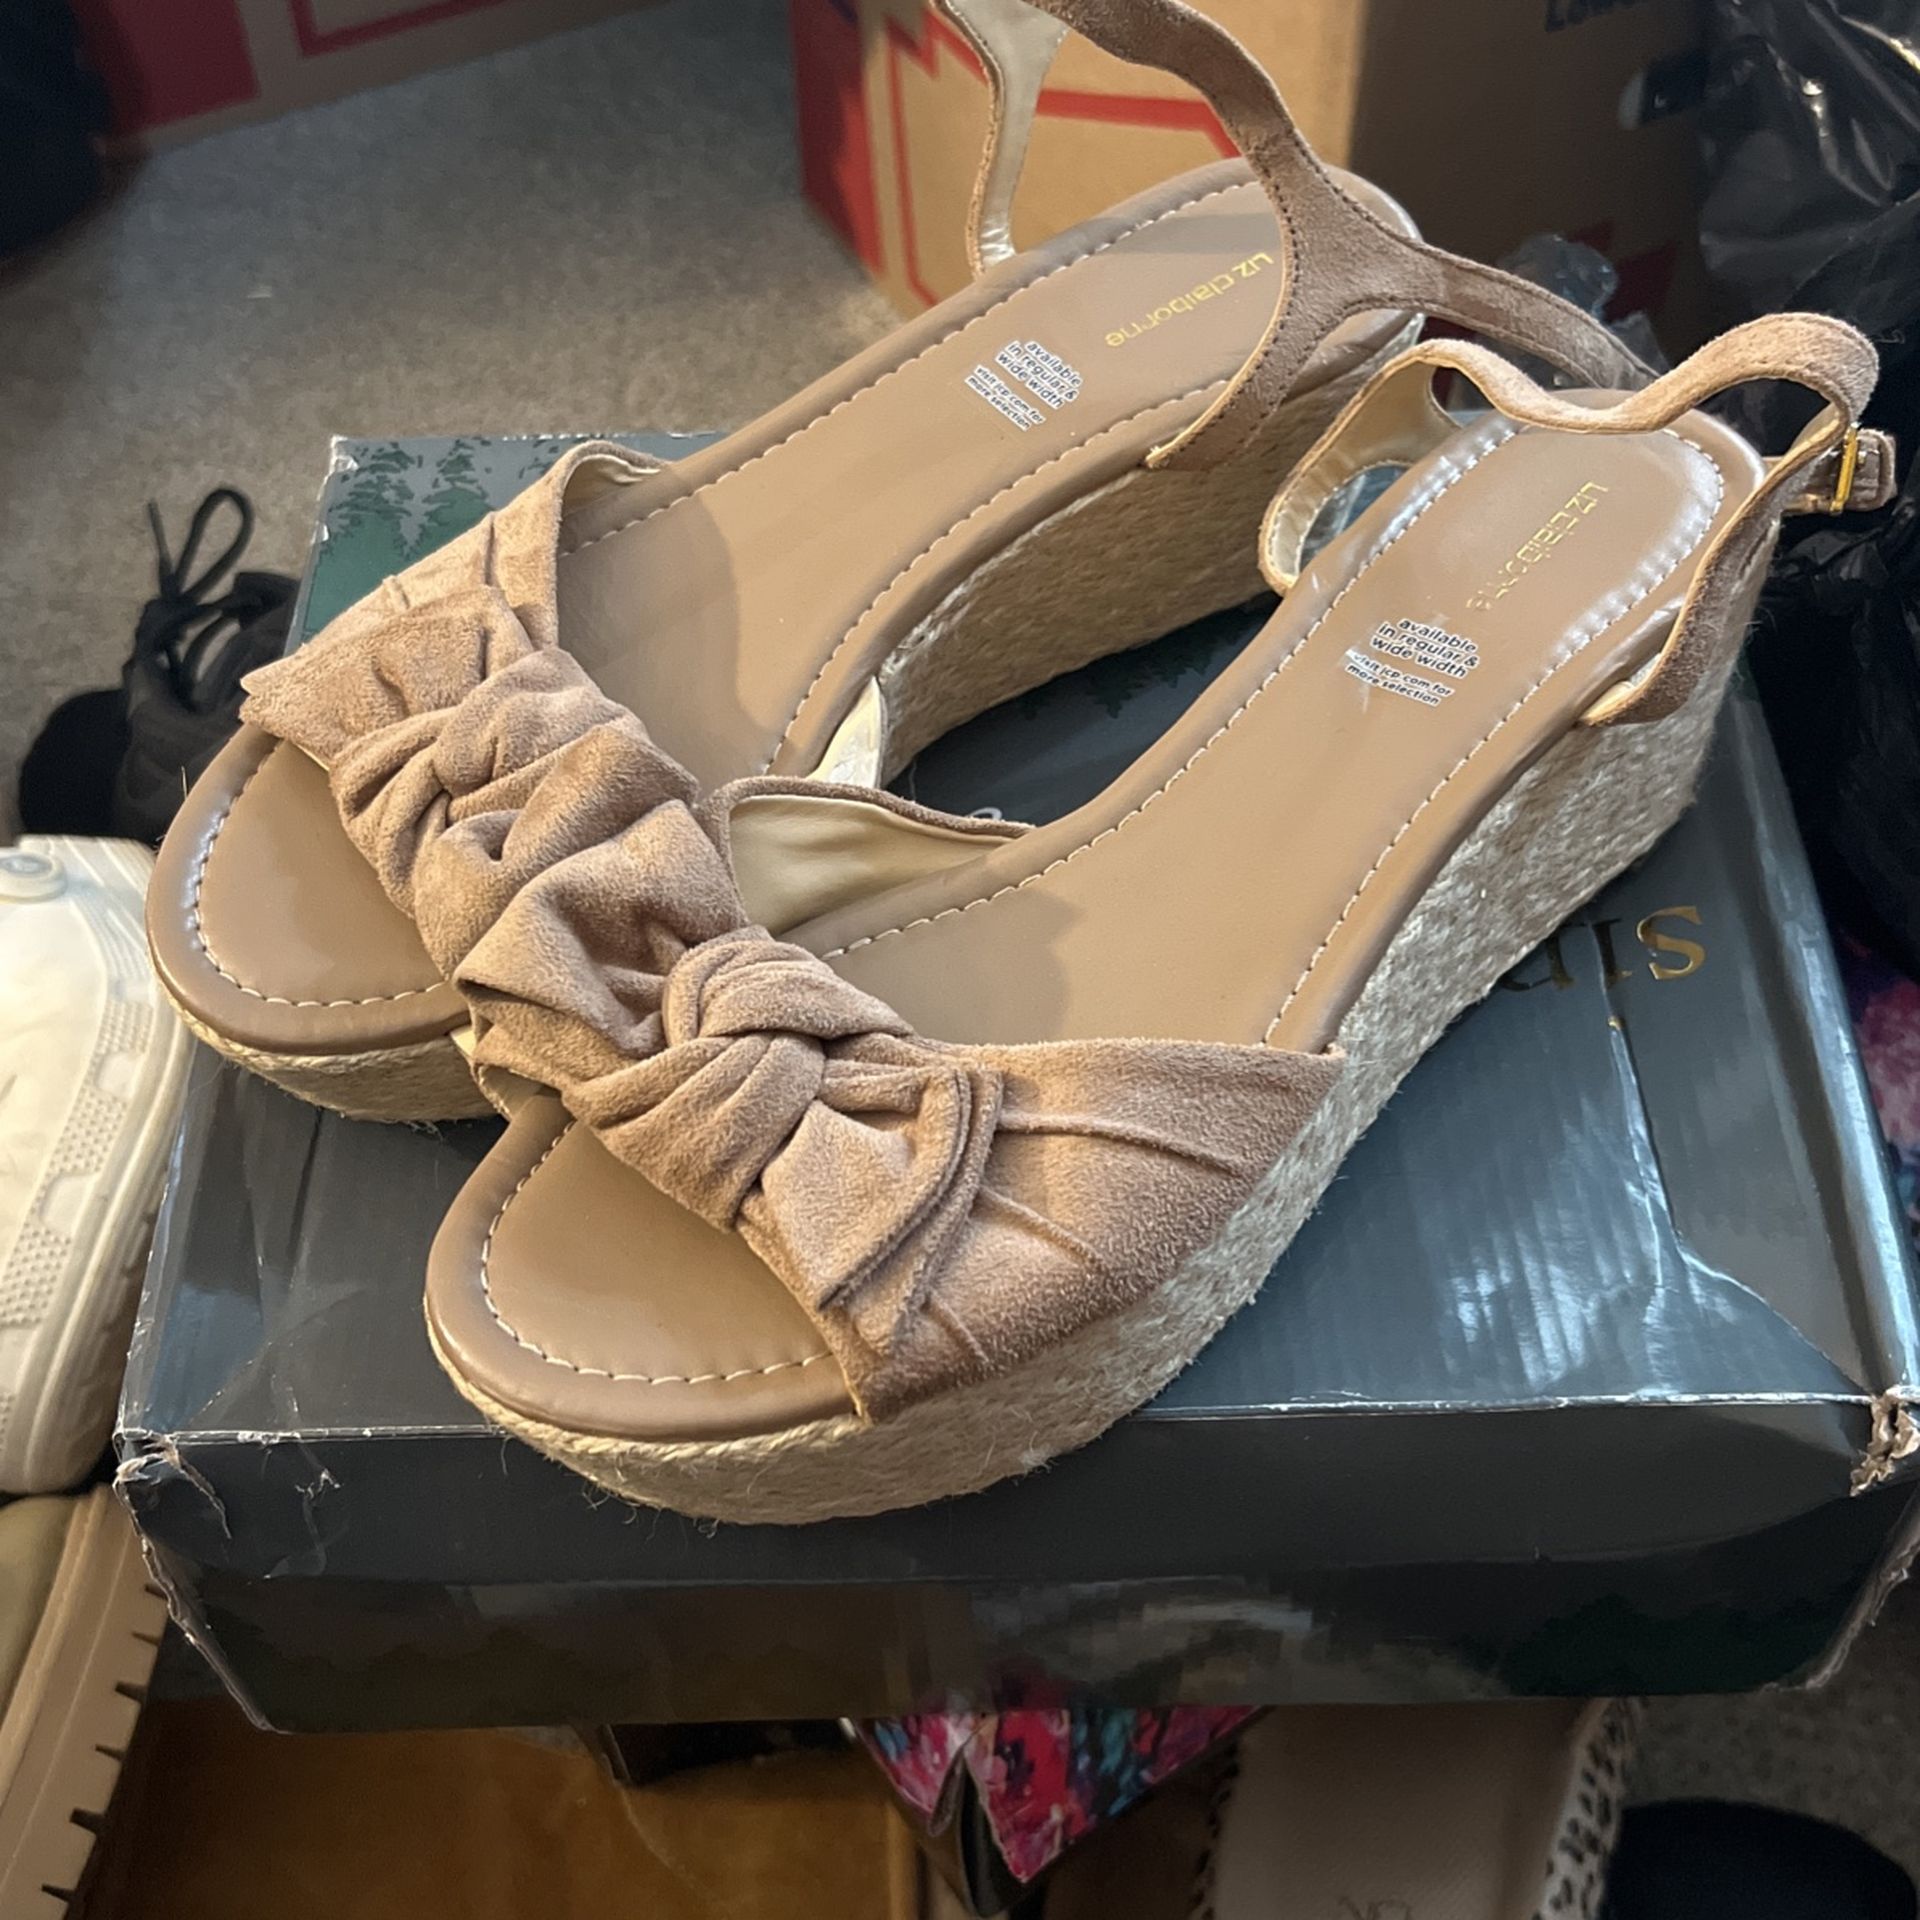 Women’s Brand Name Shoes: Sizes (8.5-11)